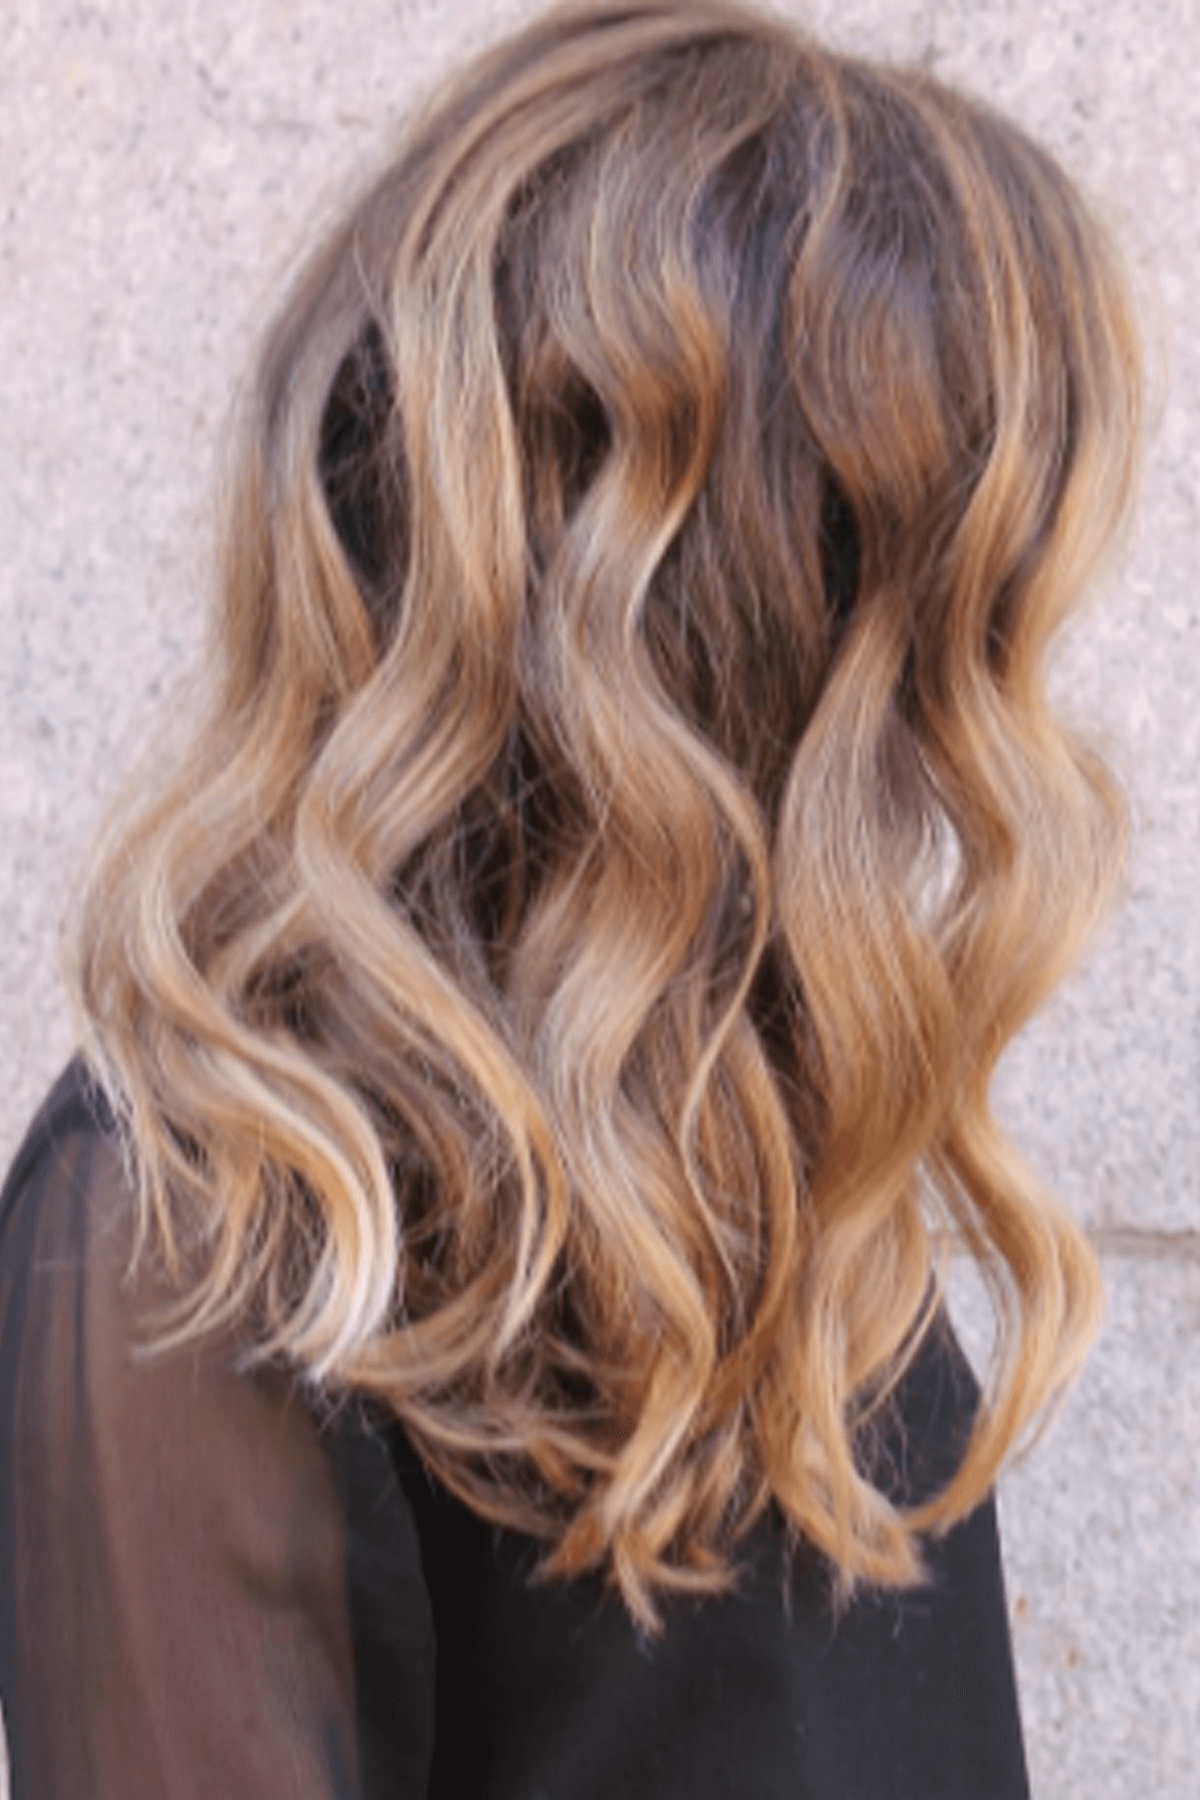 2019 hair color trends